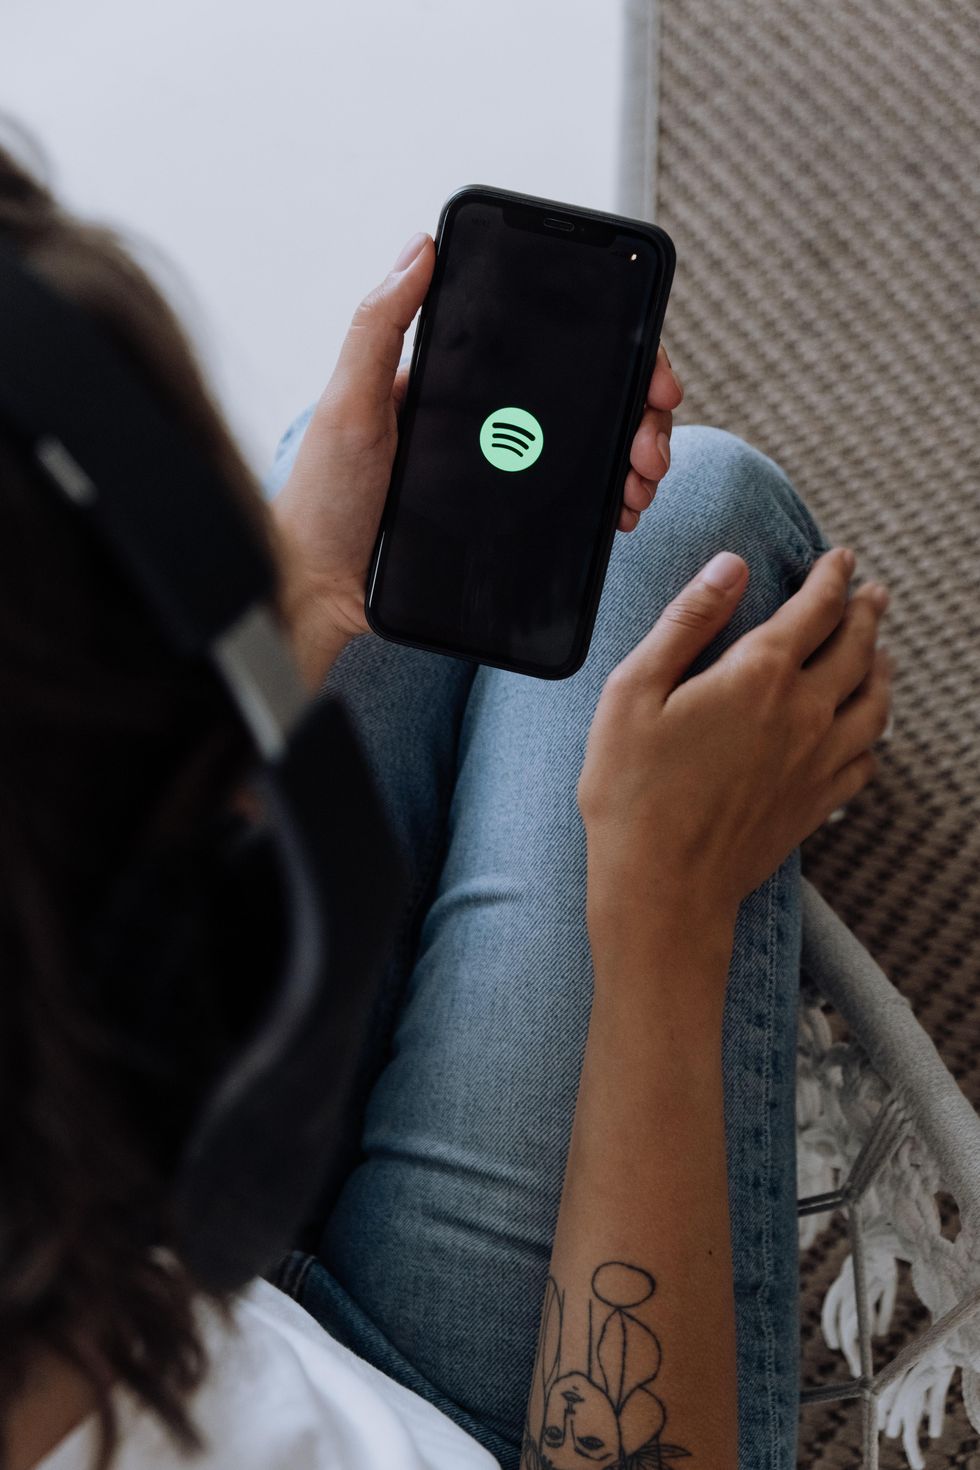 How Apps Like Spotify Is Infiltrating Our Data